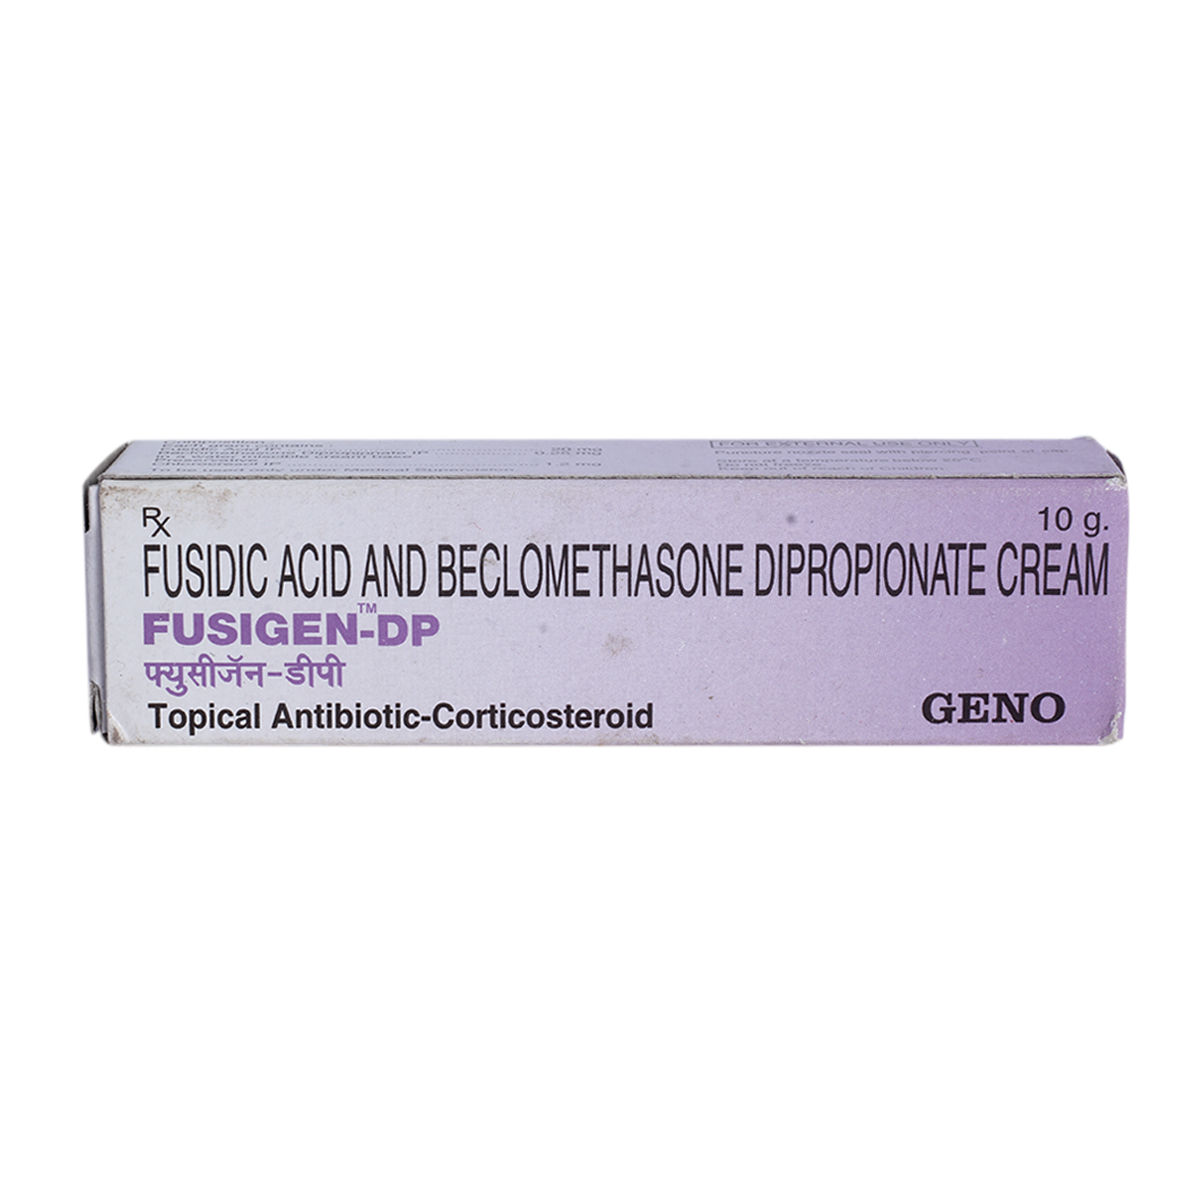 Fusigen-DP Cream 10 gm Price, Uses, Side Effects, Composition ...